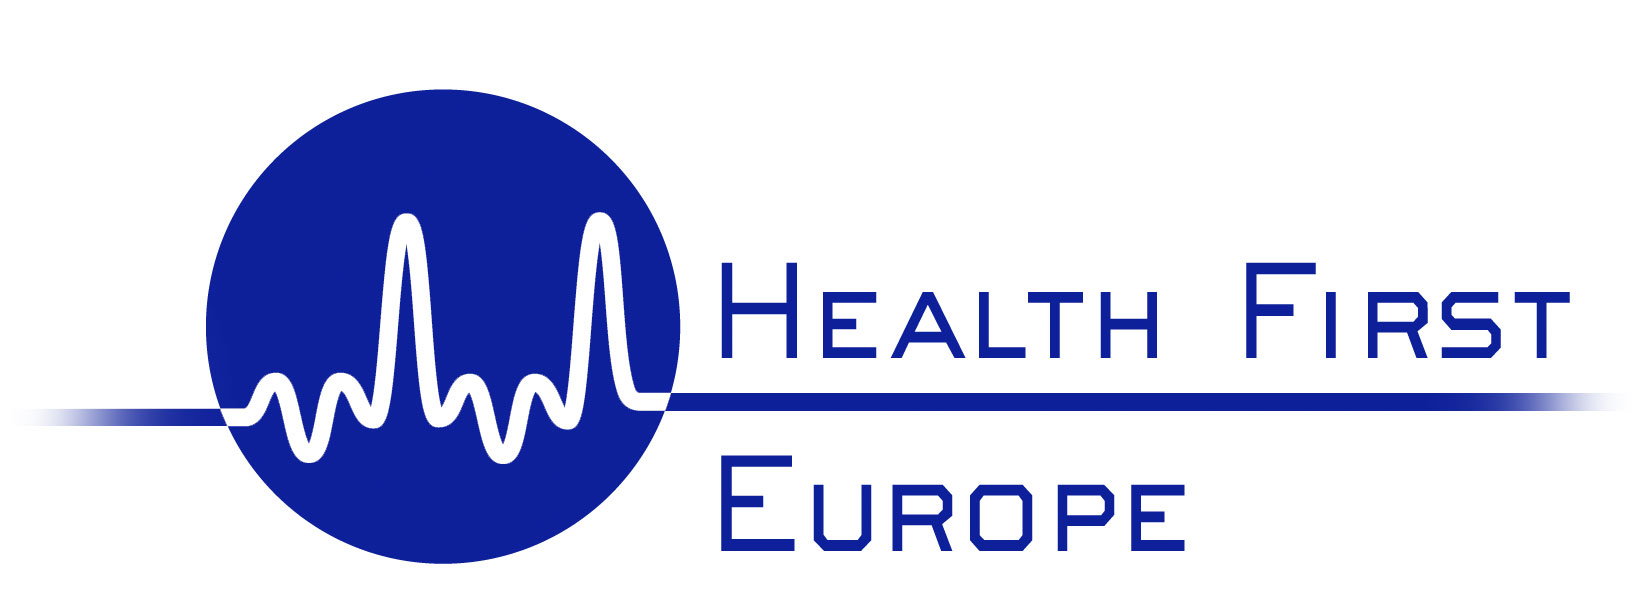 H1 eu. Health Europe. European Medical Association. Union of European Medical Specialists. School for Health in Europe.